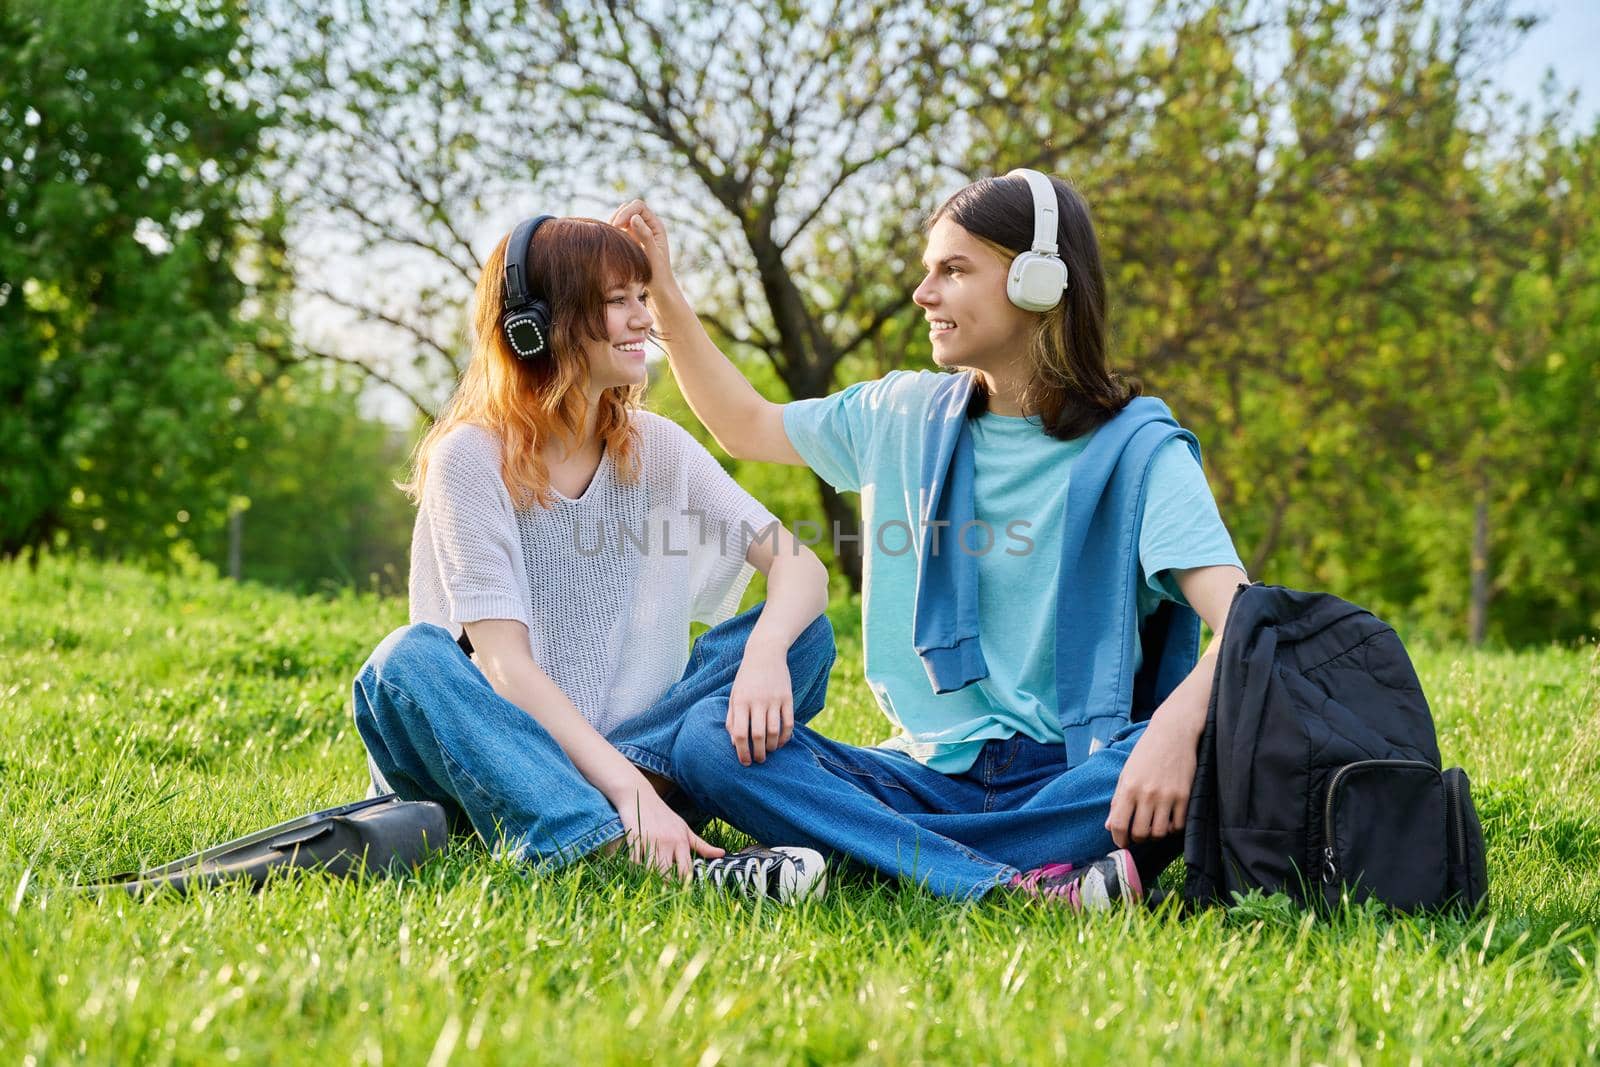 Couple of friends guy and girl 17, 18 years old sitting on grass. Students in headphones with backpacks sitting on campus lawn, talking and laughing. Teens, youth, friendship, education, young people